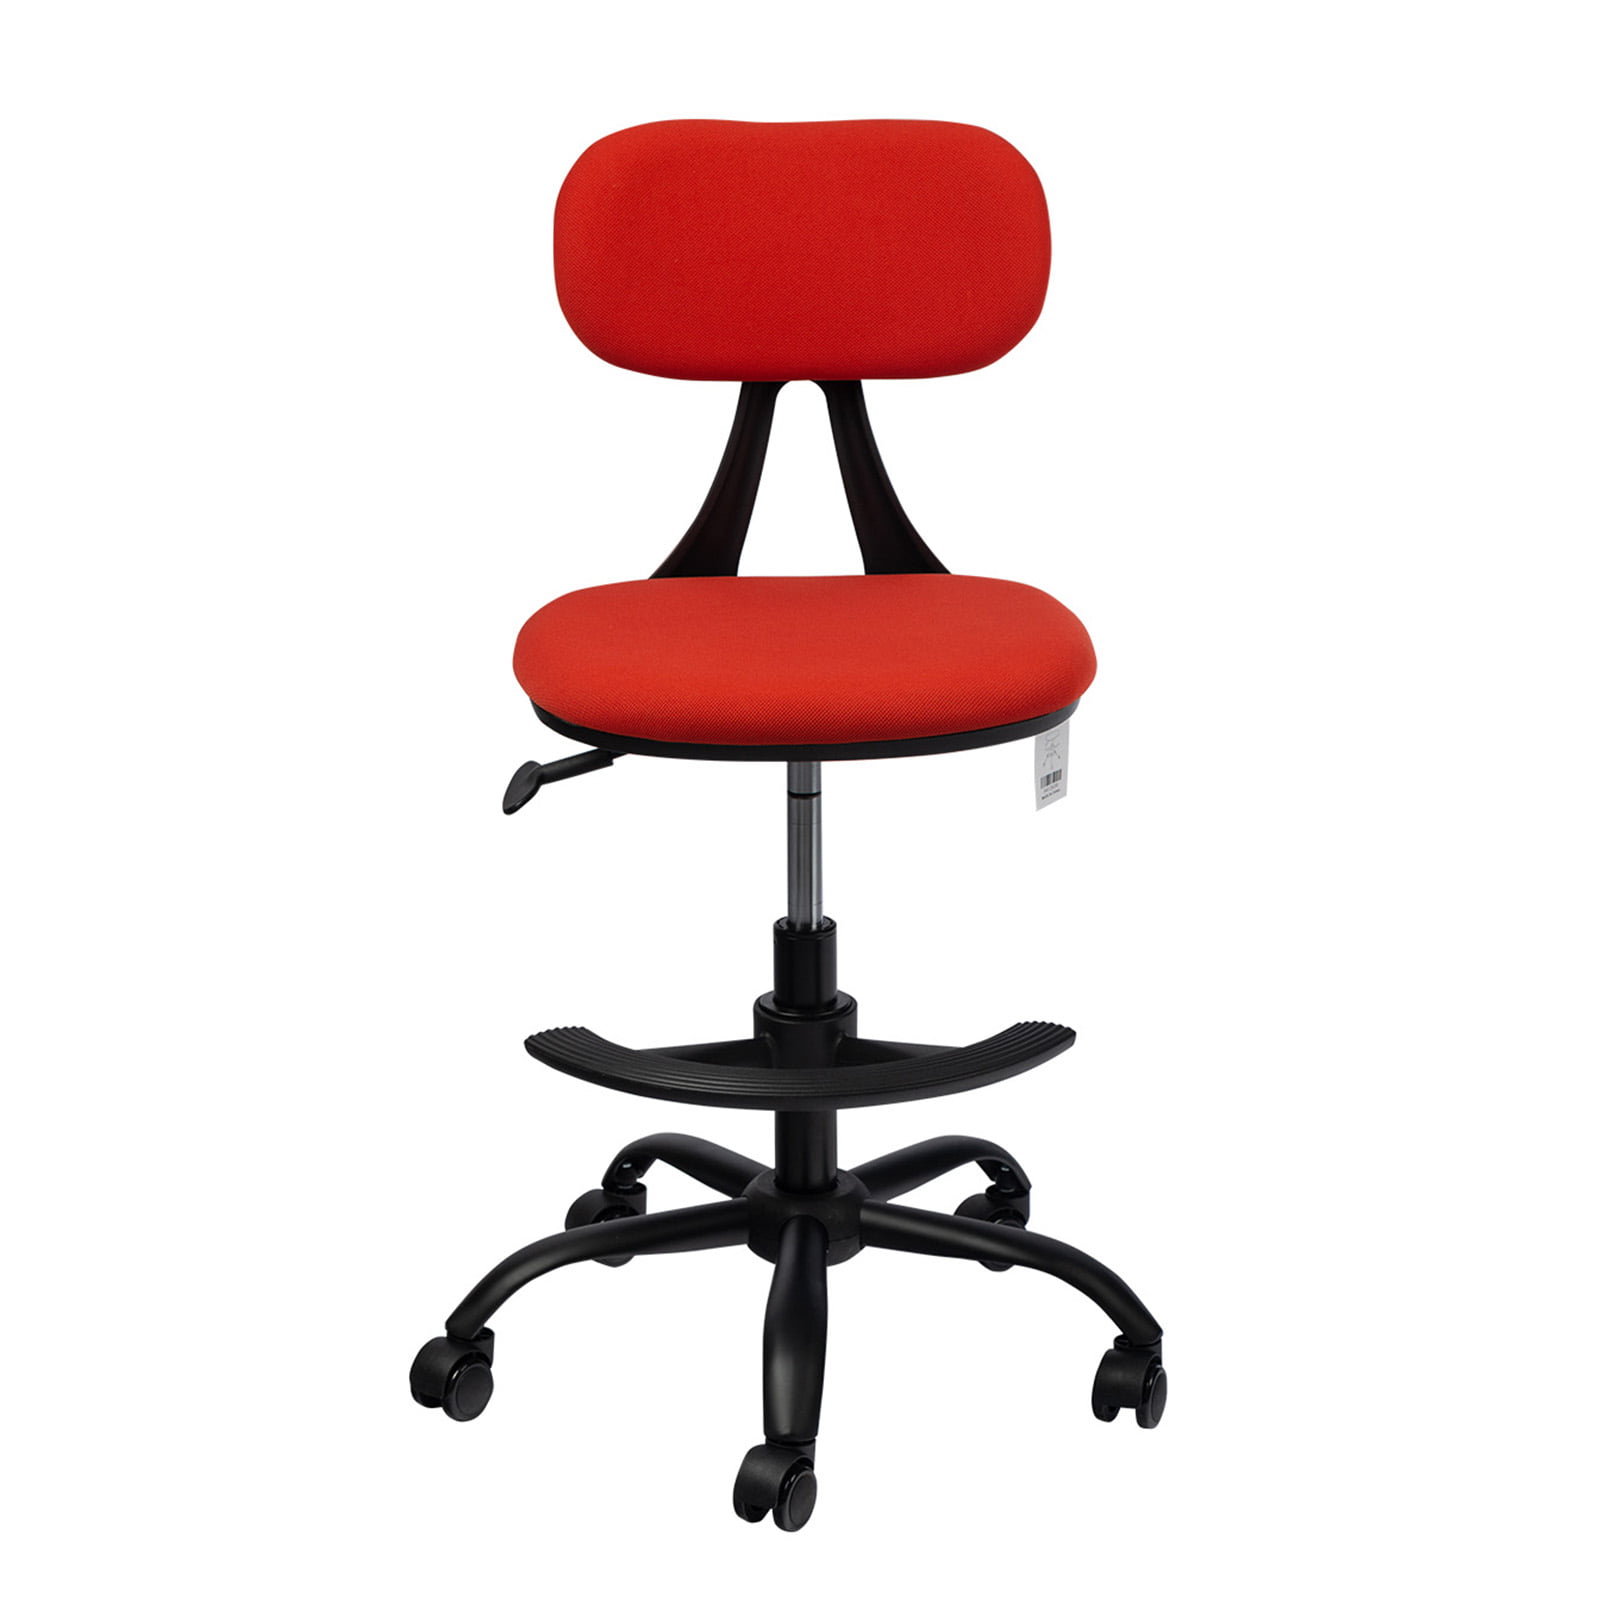 Black Amolife Drafting Chair Multi-Purpose Adjustable Drafting Stool Rolling Swivel Stool with Backrest/Foot Rest/Wheels 